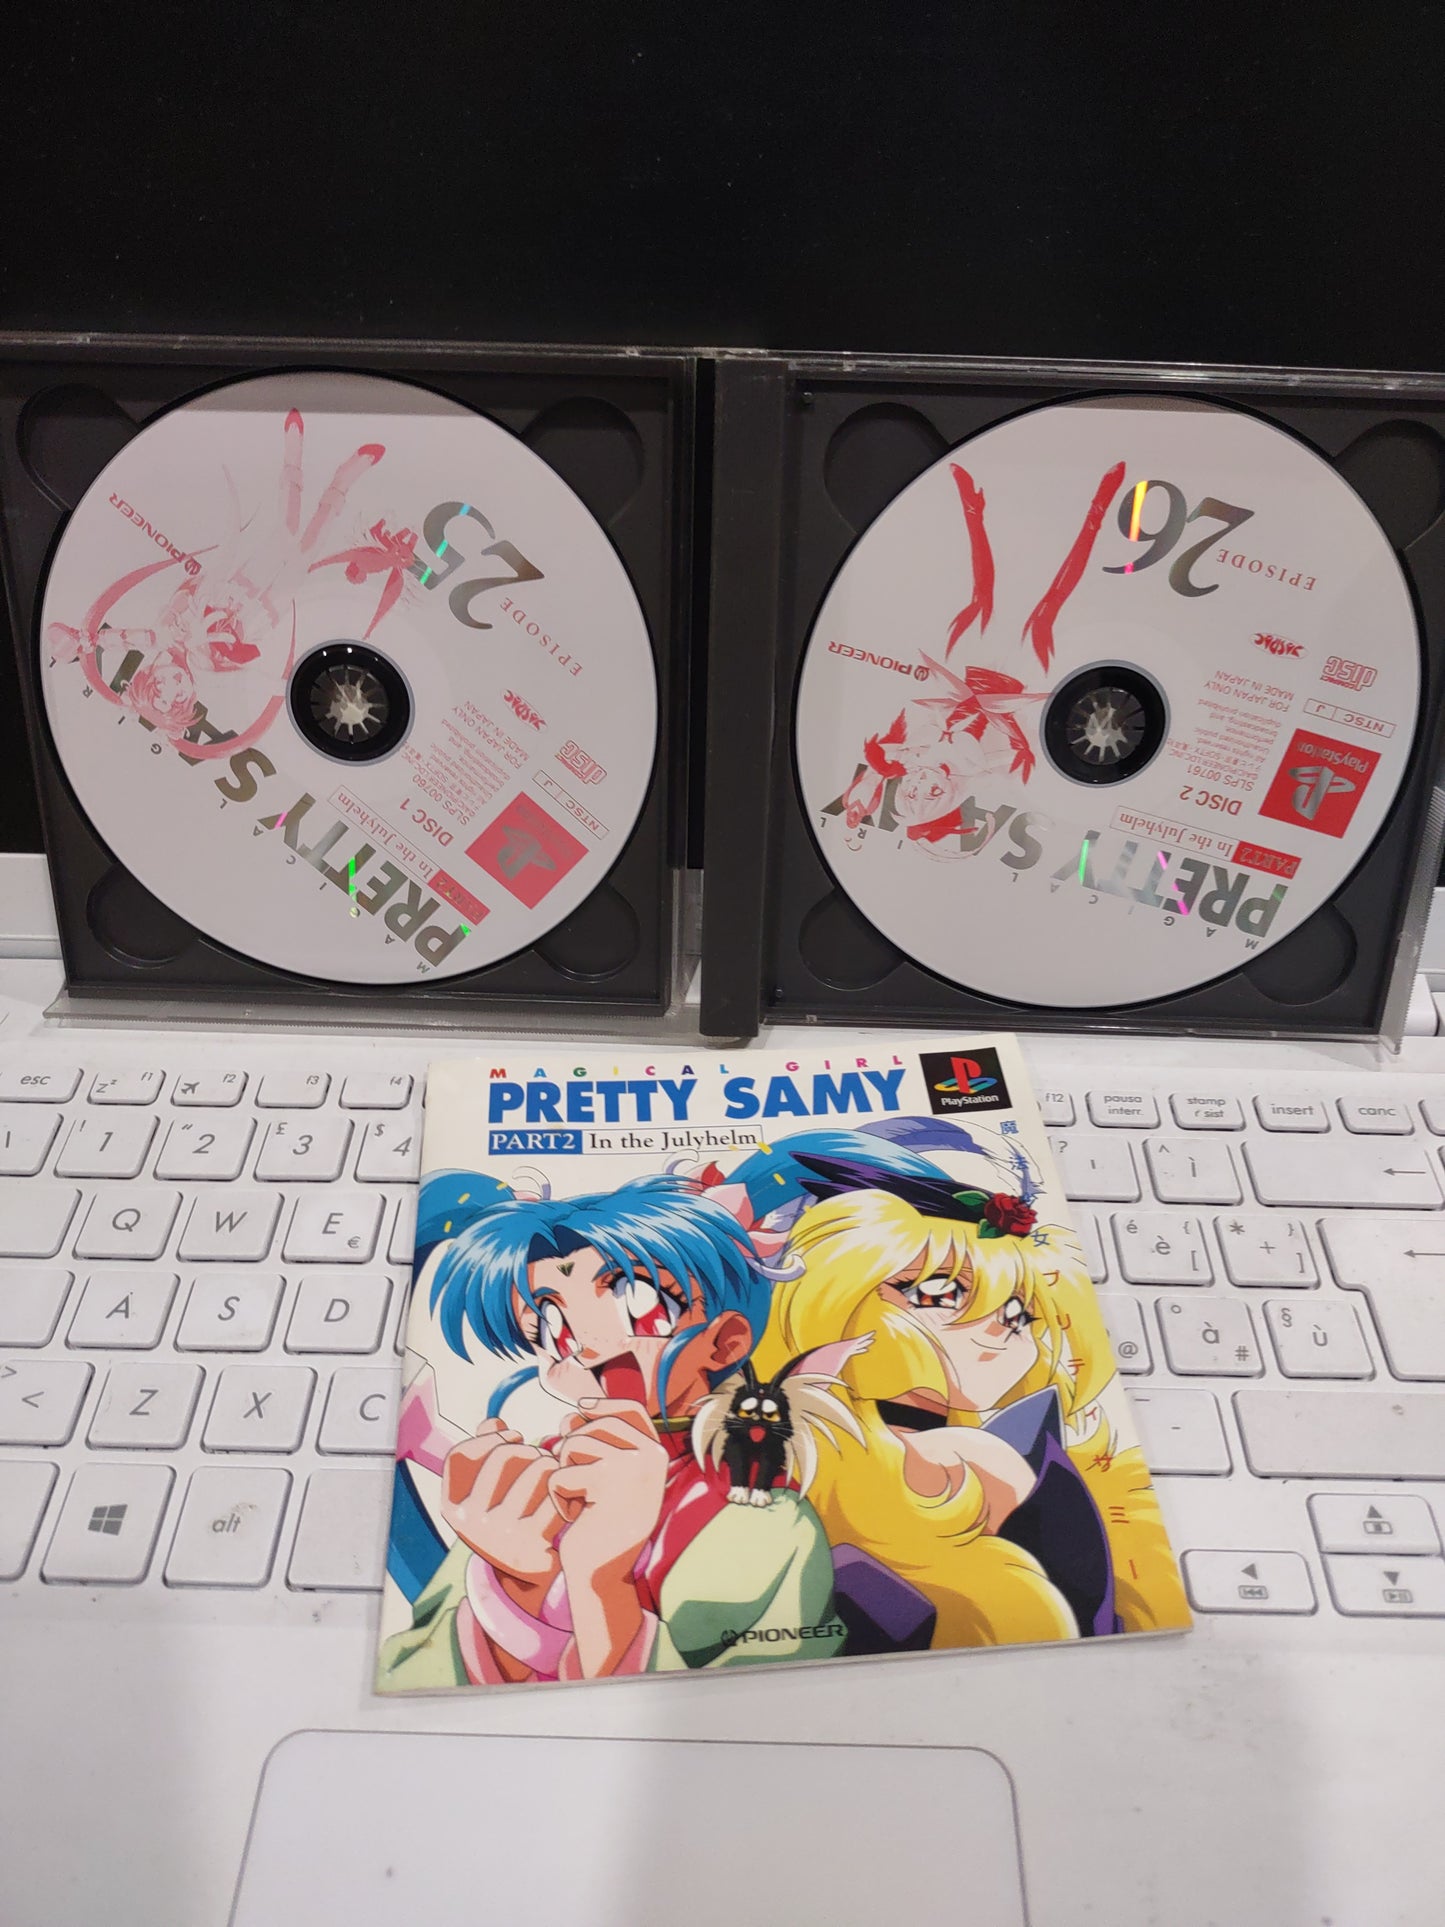 Gioco PS1 PlayStation Japan magical girl pretty samy part2 in the julyhelm